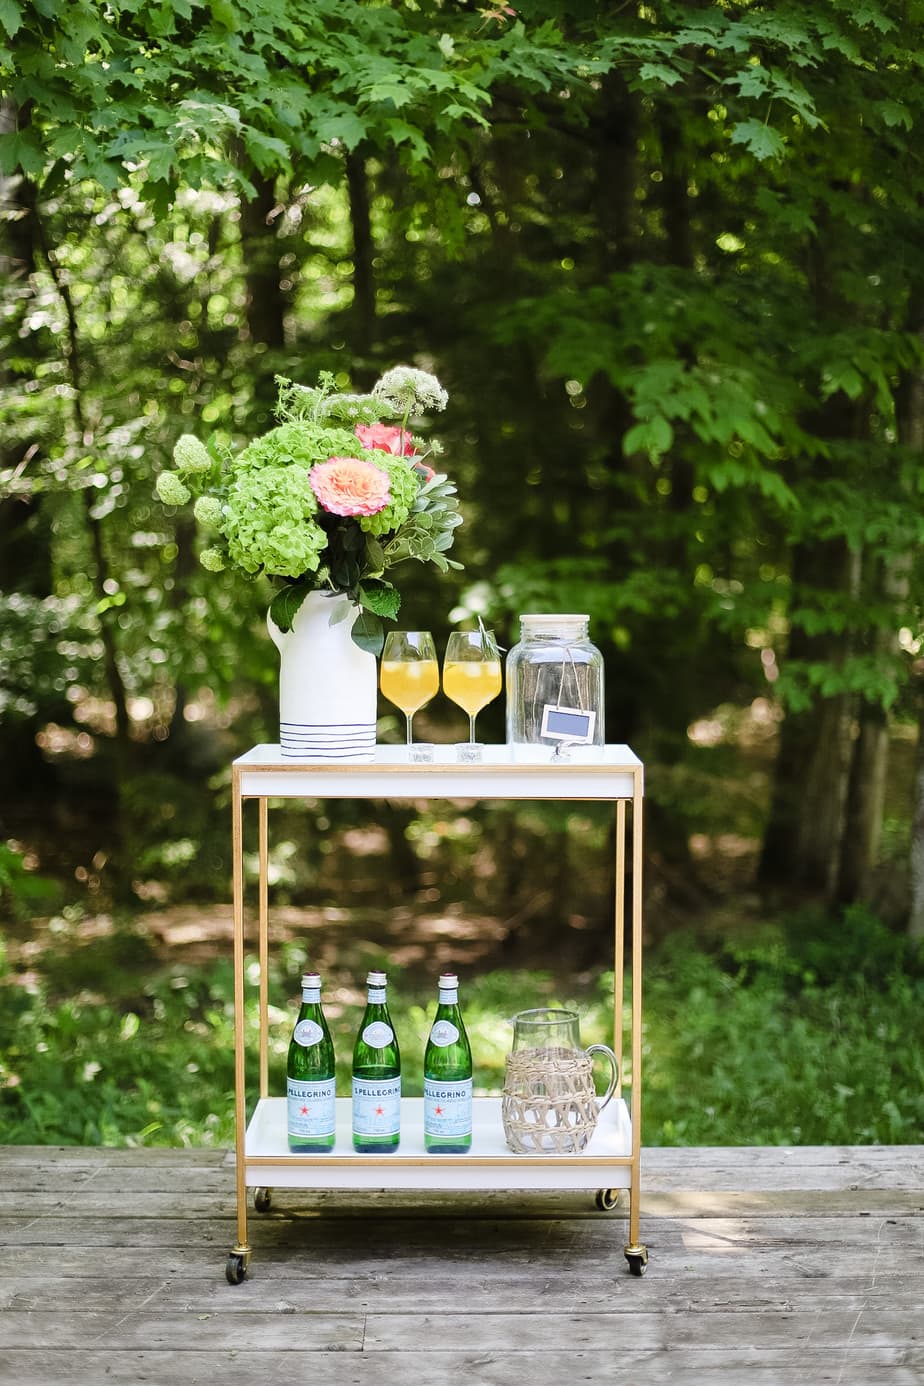 8 Fun Non-Alcoholic Bar Cart Ideas to try this Summer!